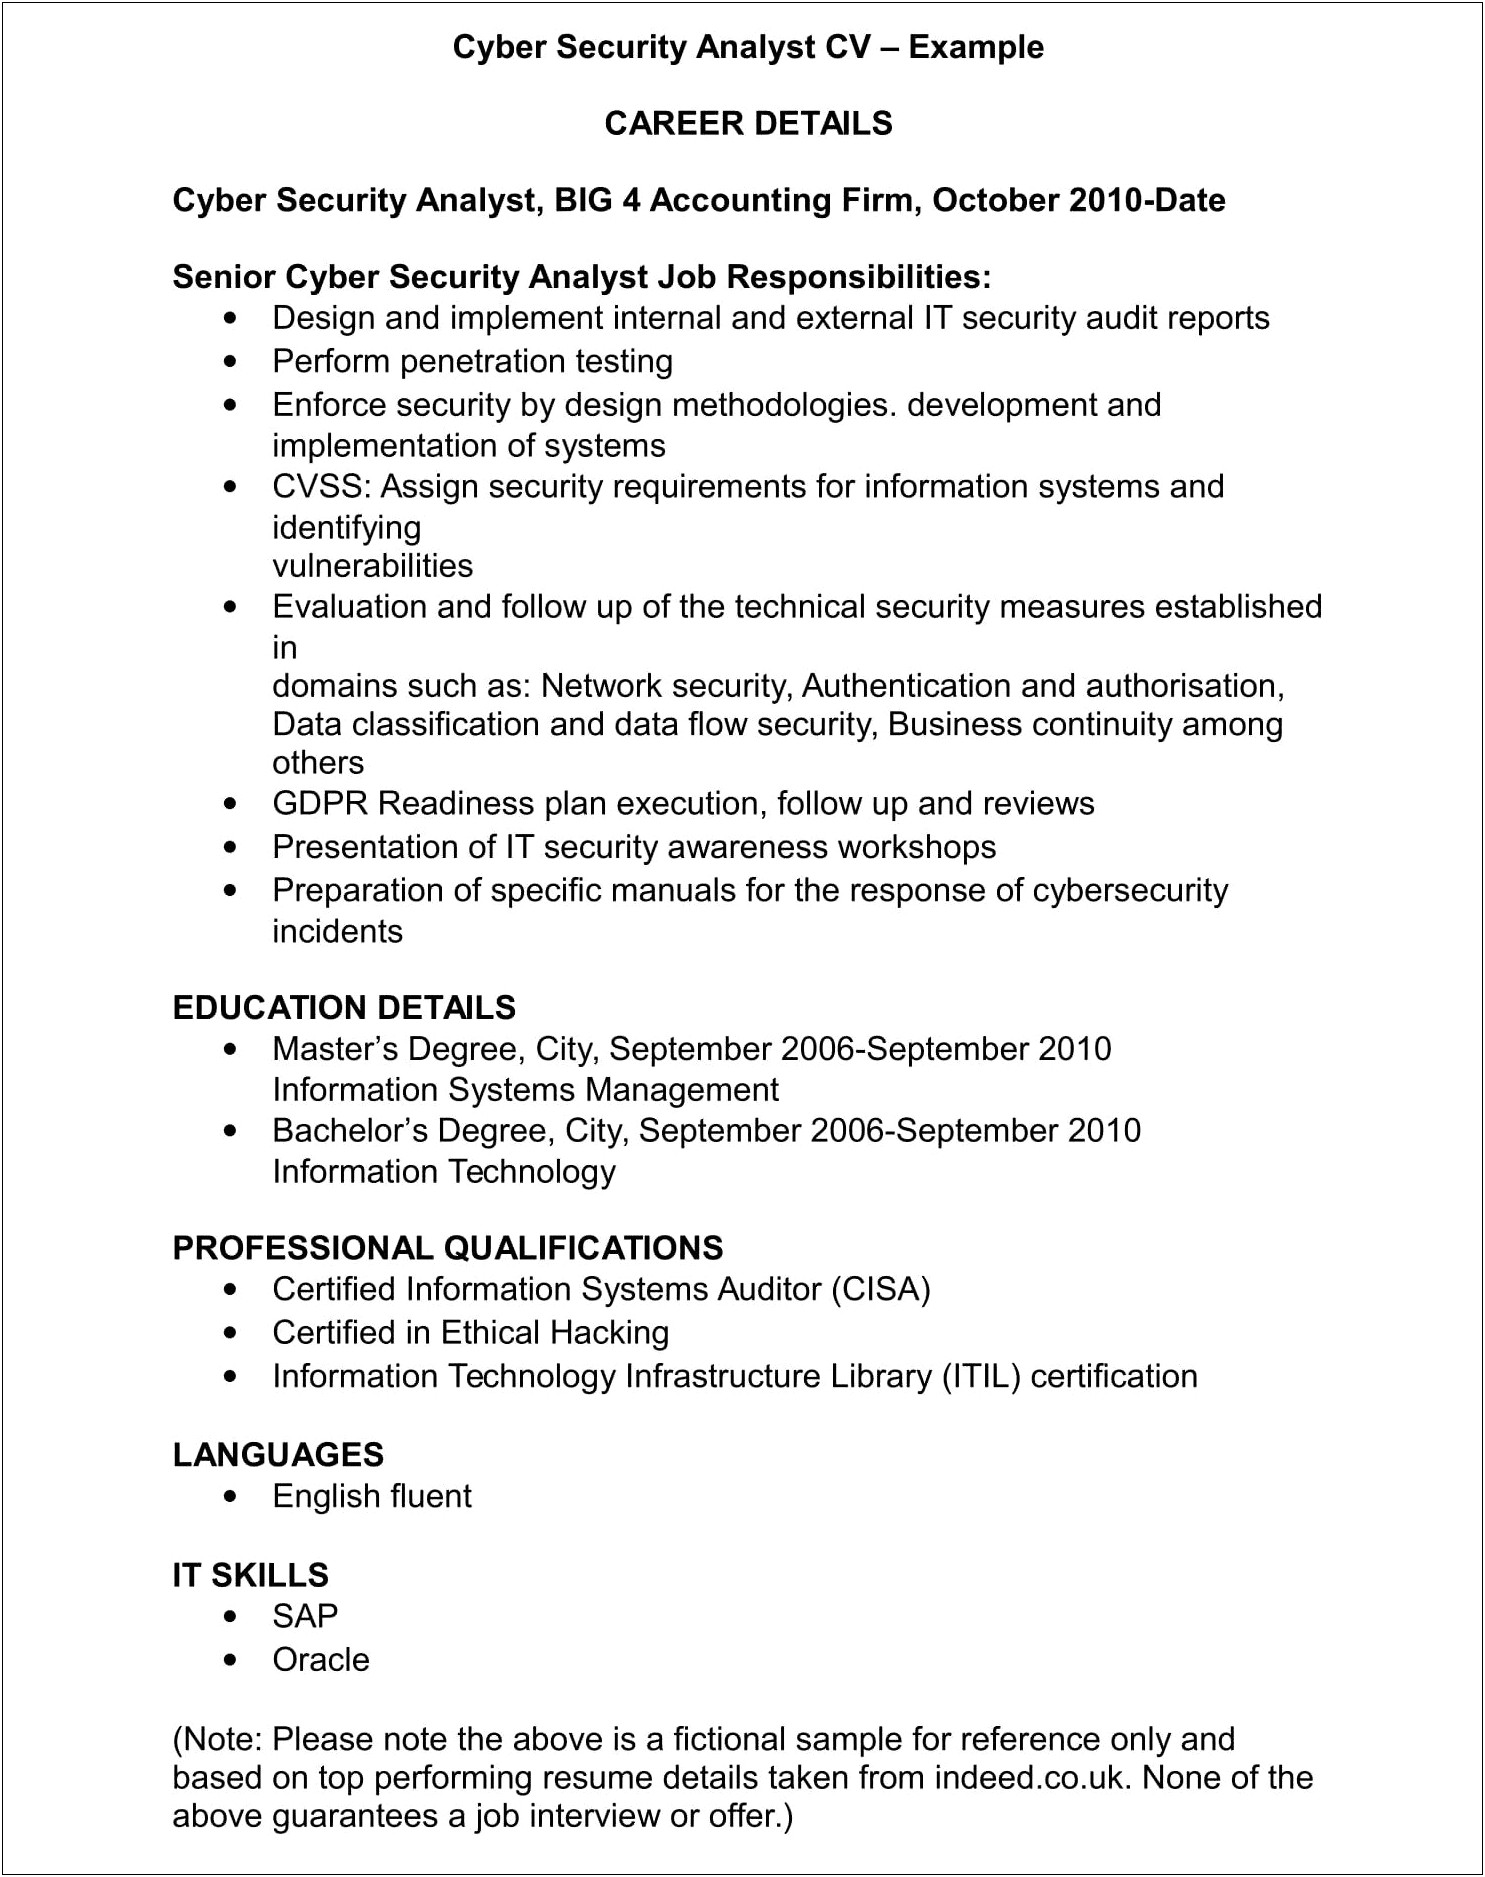 Resume Examples For A Security Job